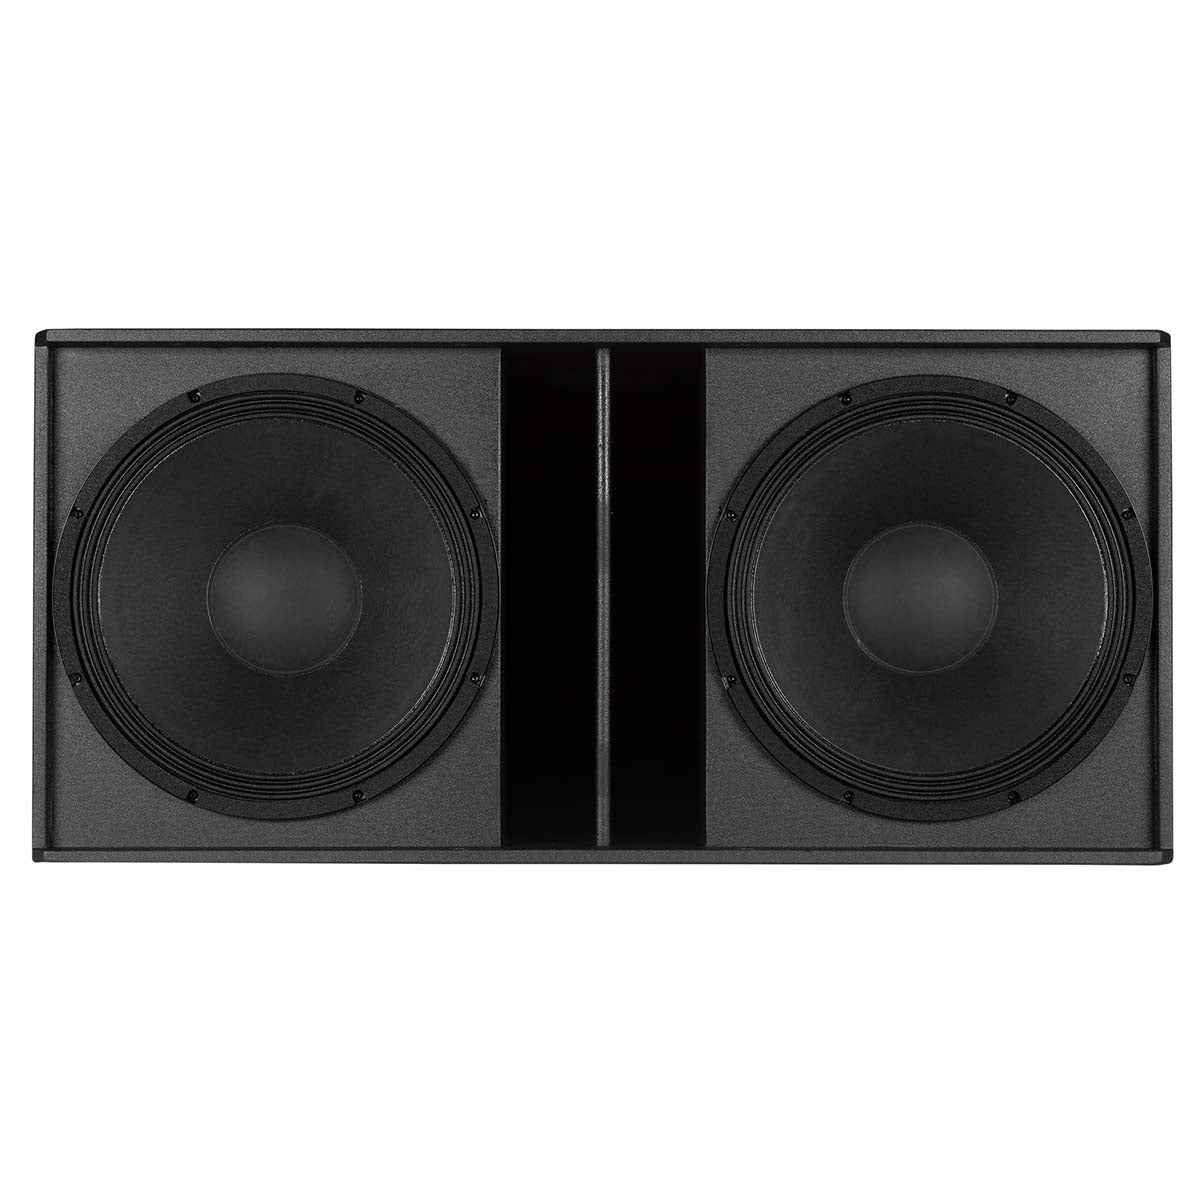 RCF SUB 8008-AS Double 18" Active Subwoofer (Pair)